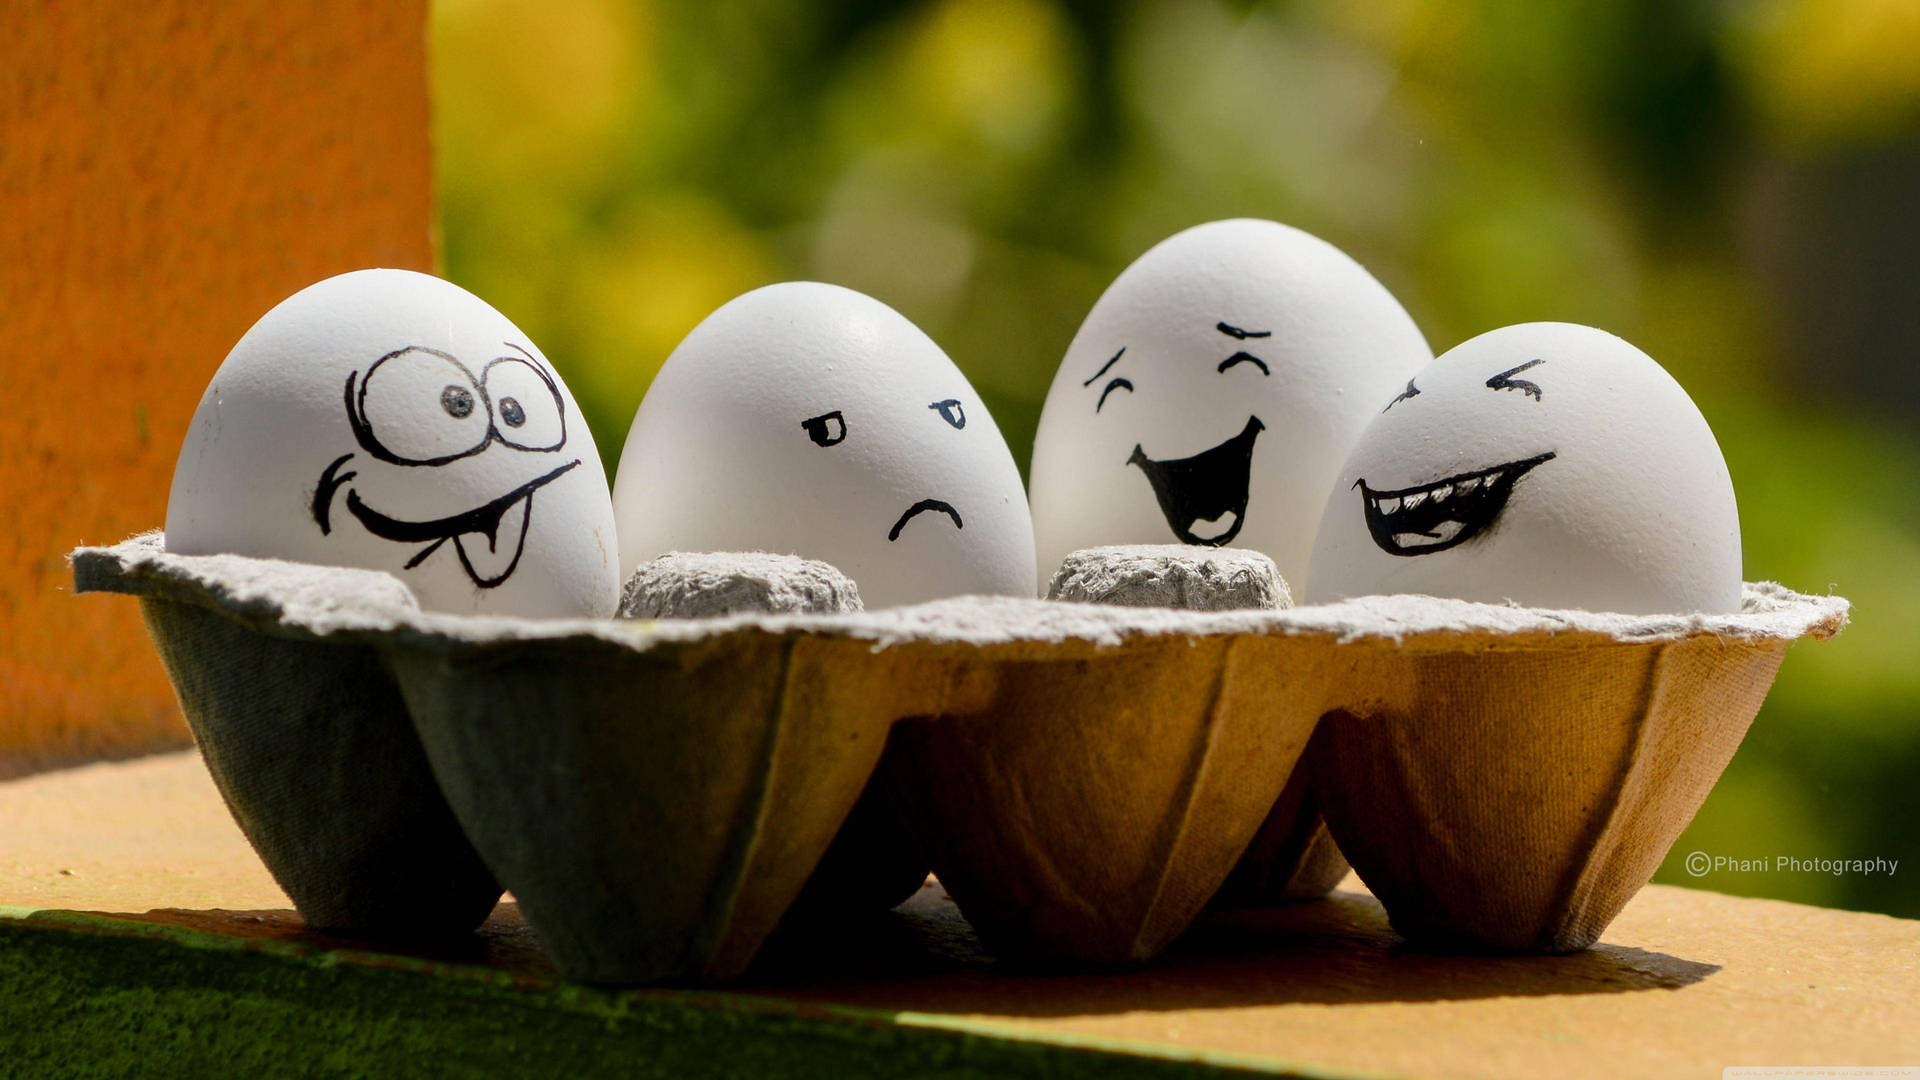 Eggs In A Tray With Cartoon Faces Wallpaper